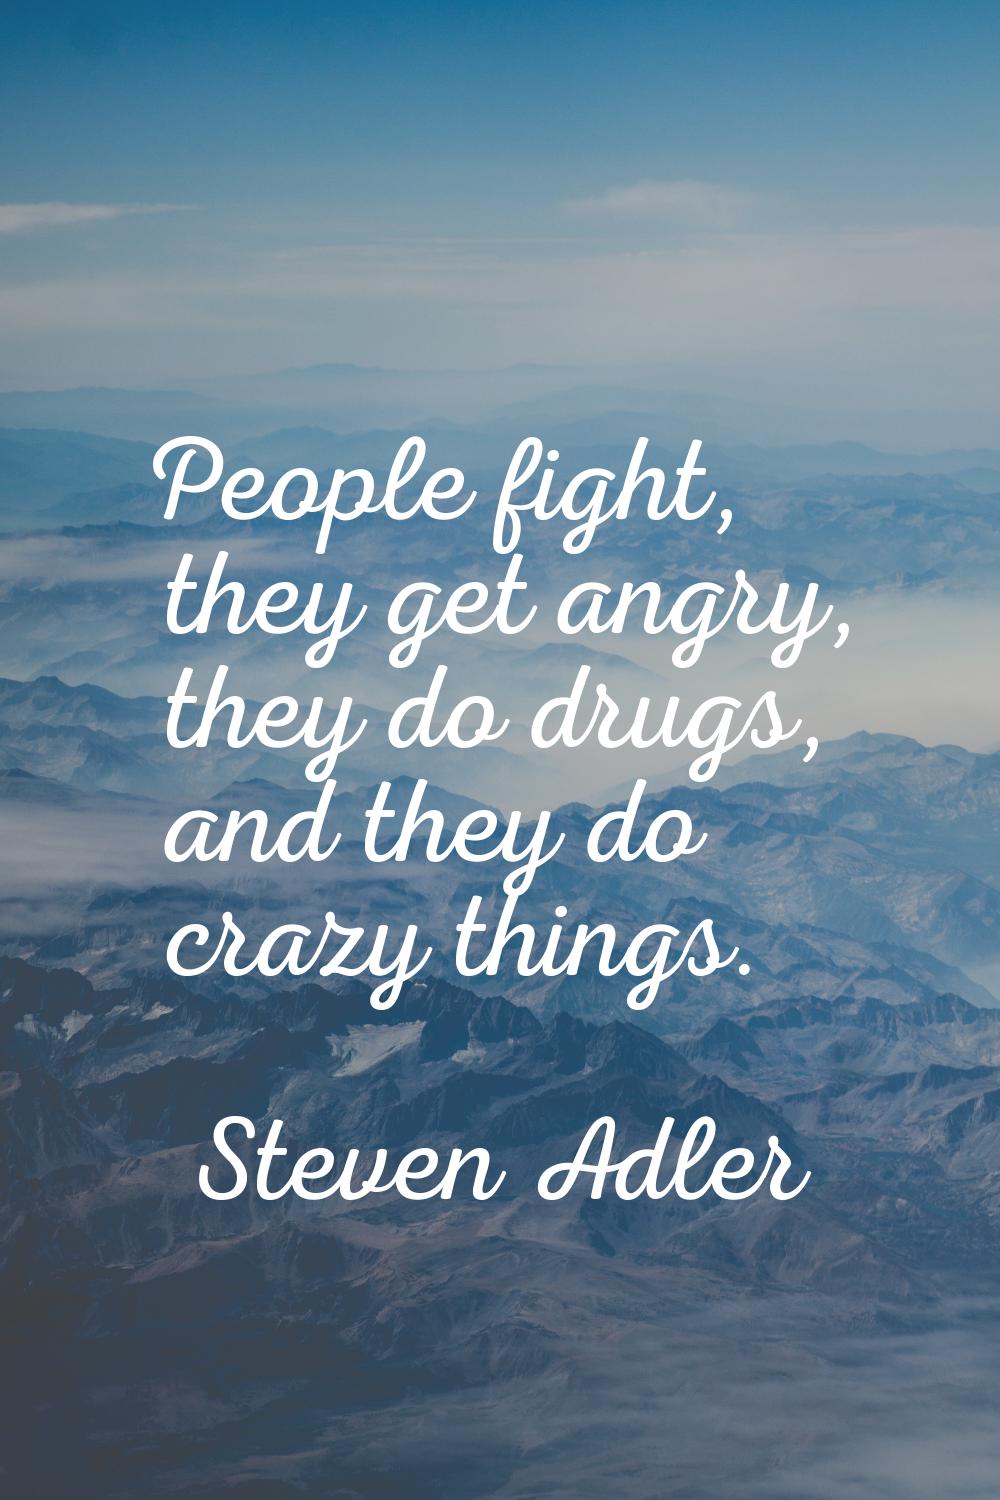 People fight, they get angry, they do drugs, and they do crazy things.